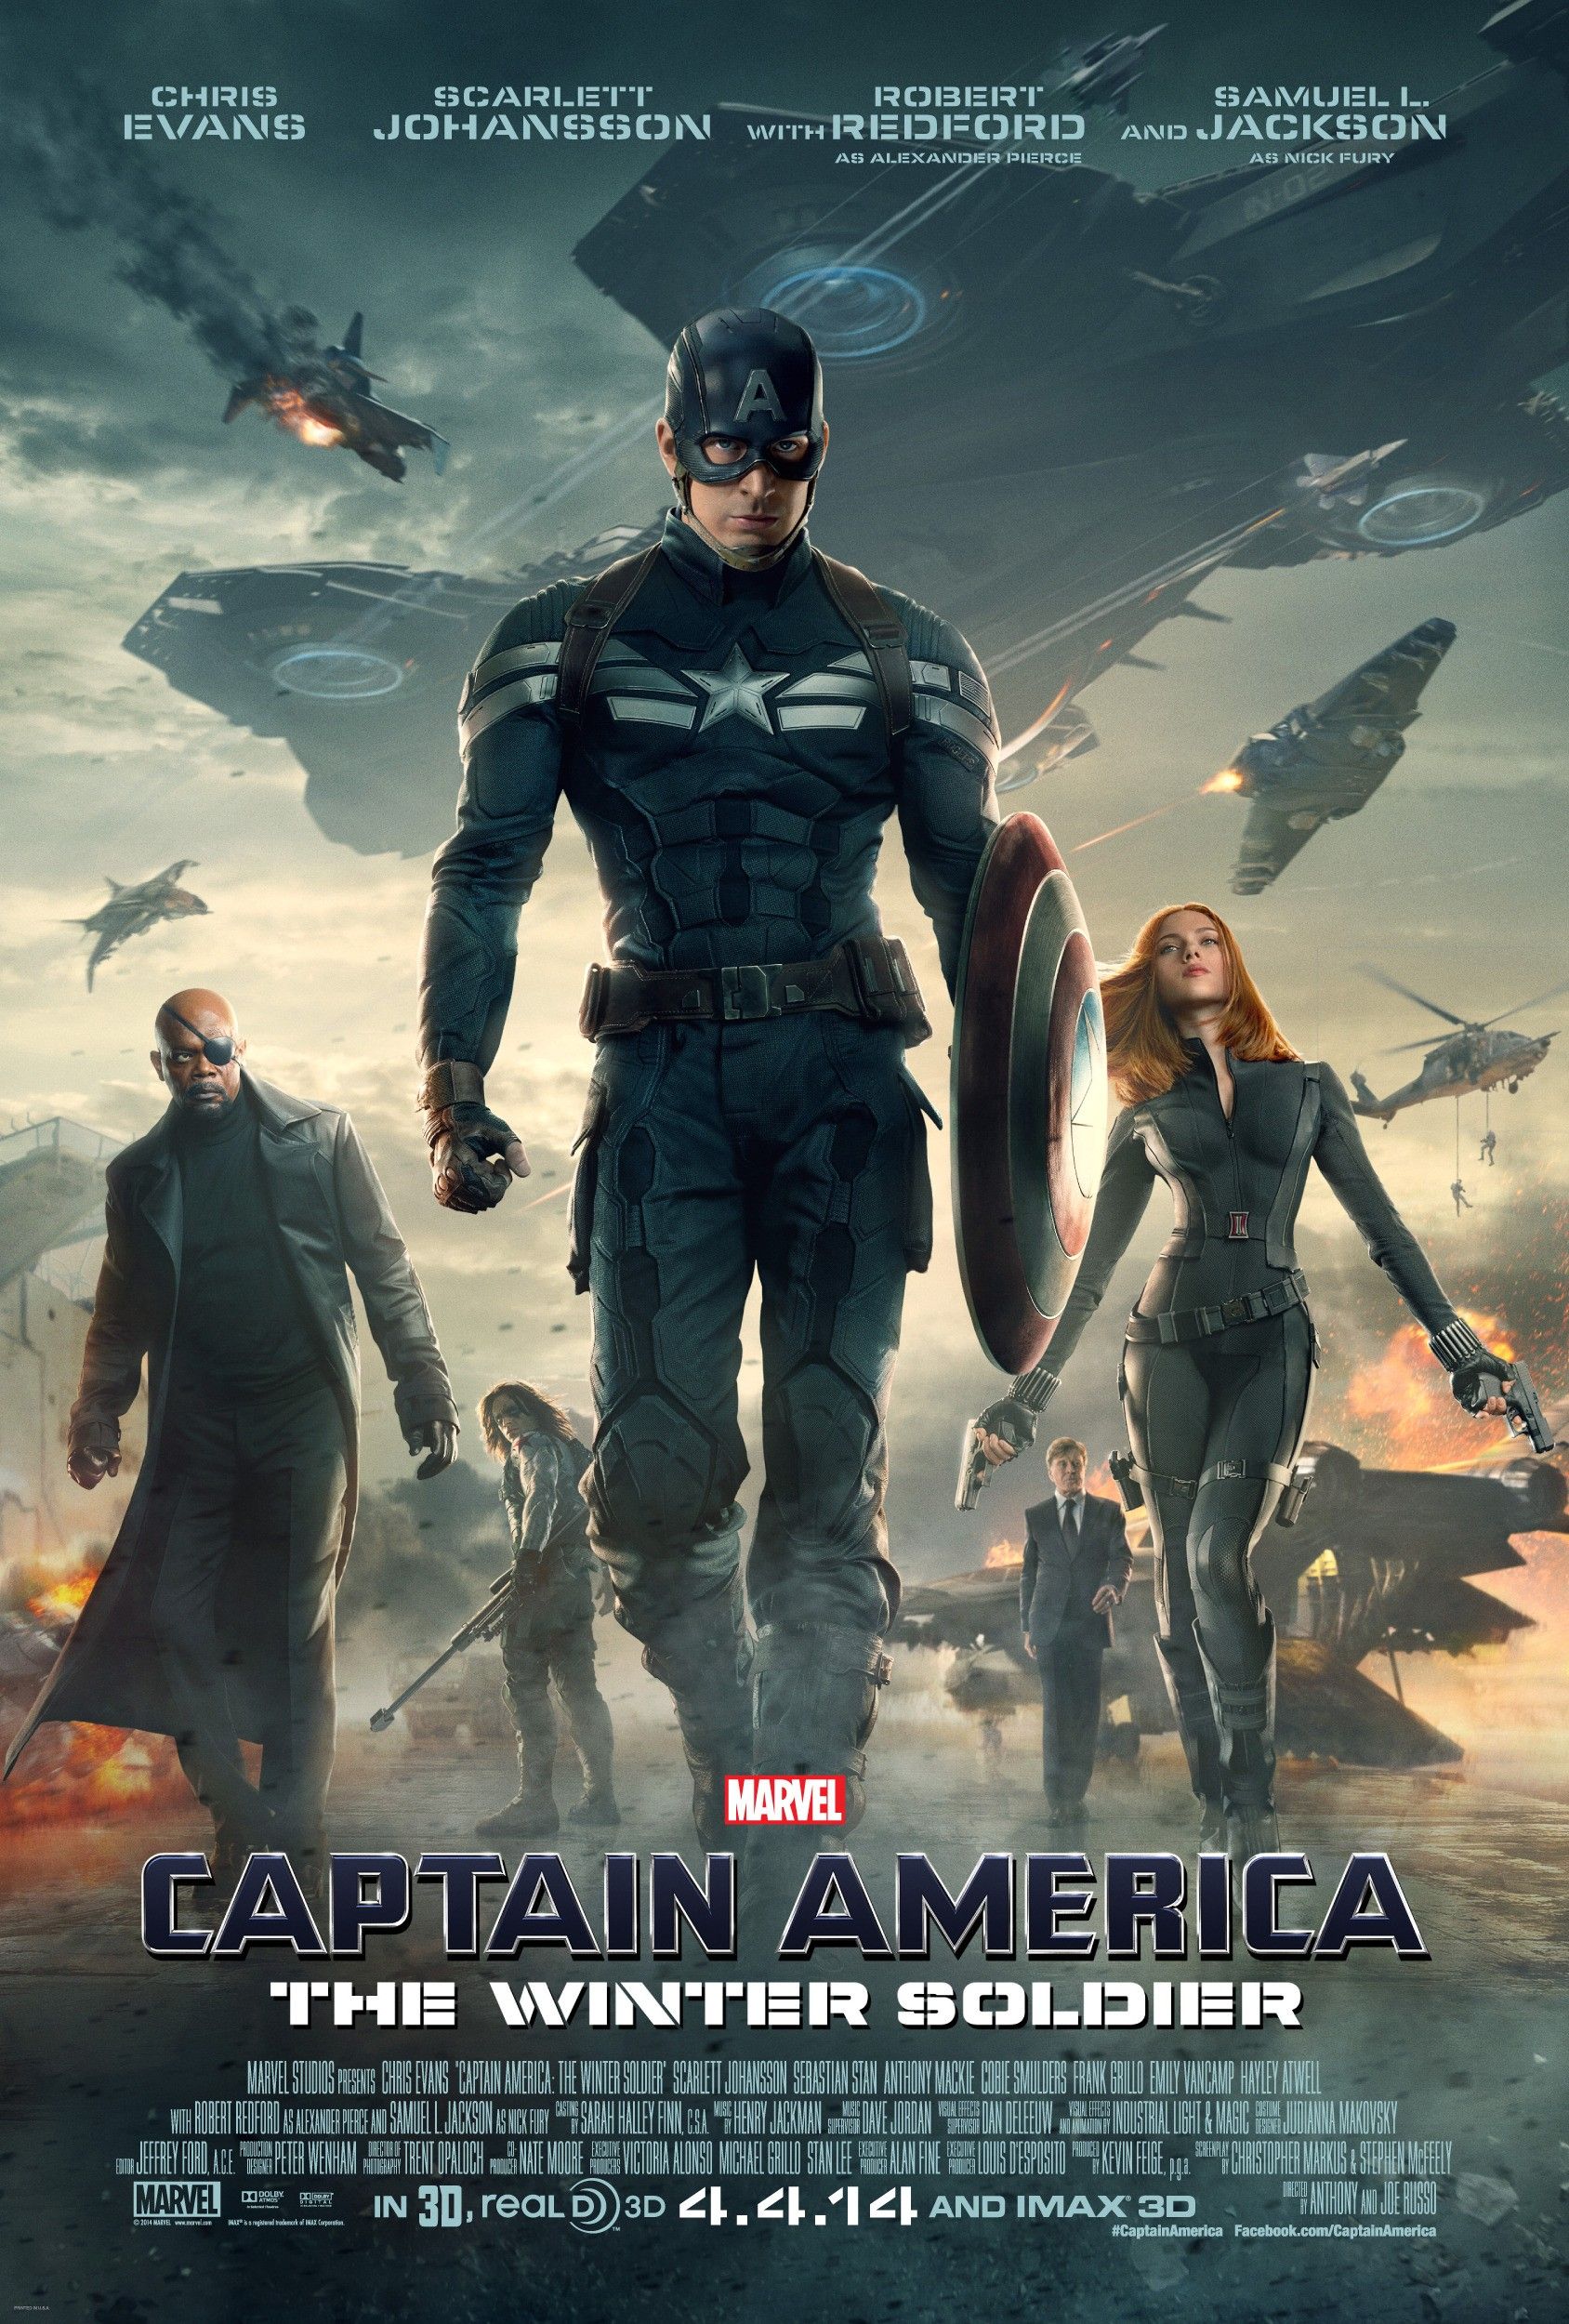 Captain America The Winter Soldier (2014) Hindi Dubbed Full Movie